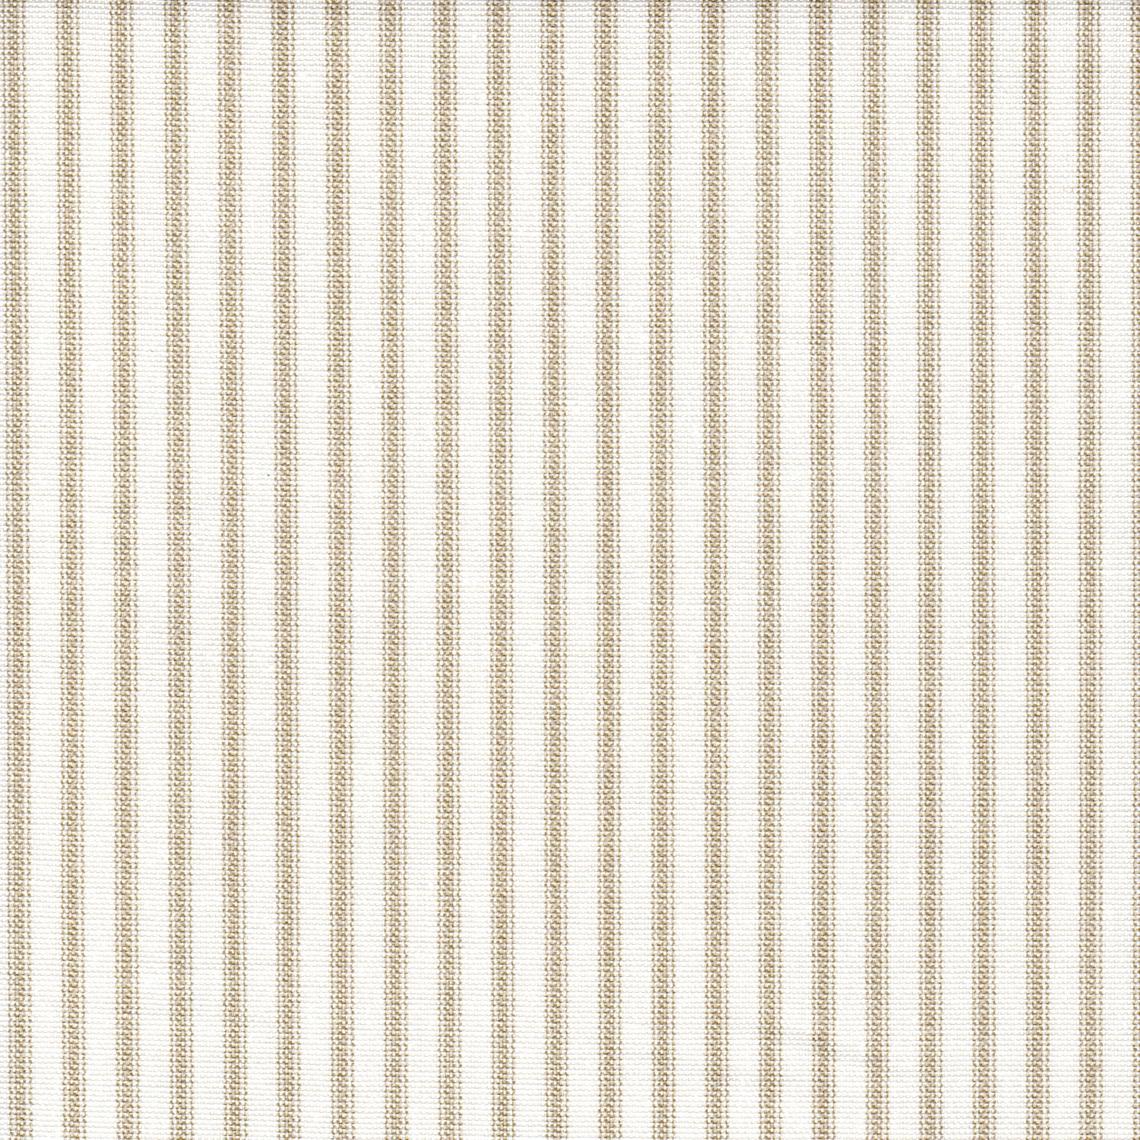 tailored tier curtains in farmhouse sand beige traditional ticking stripe